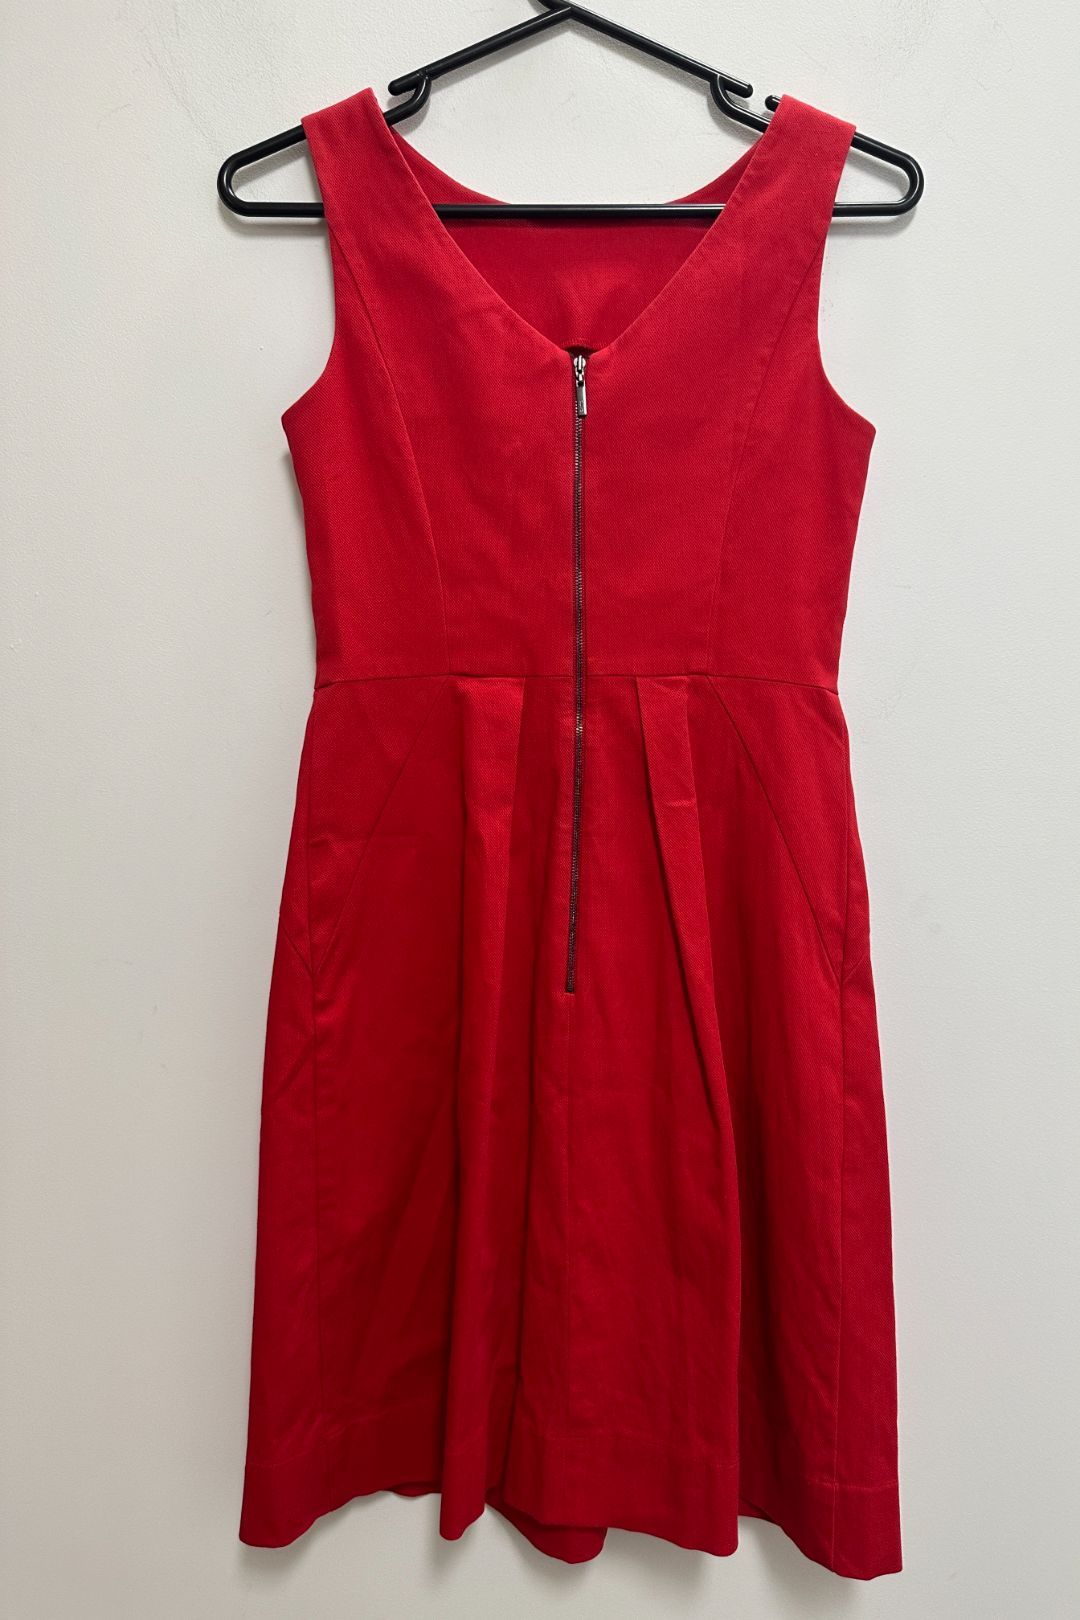 Cue Chic A-Line Dress in Red